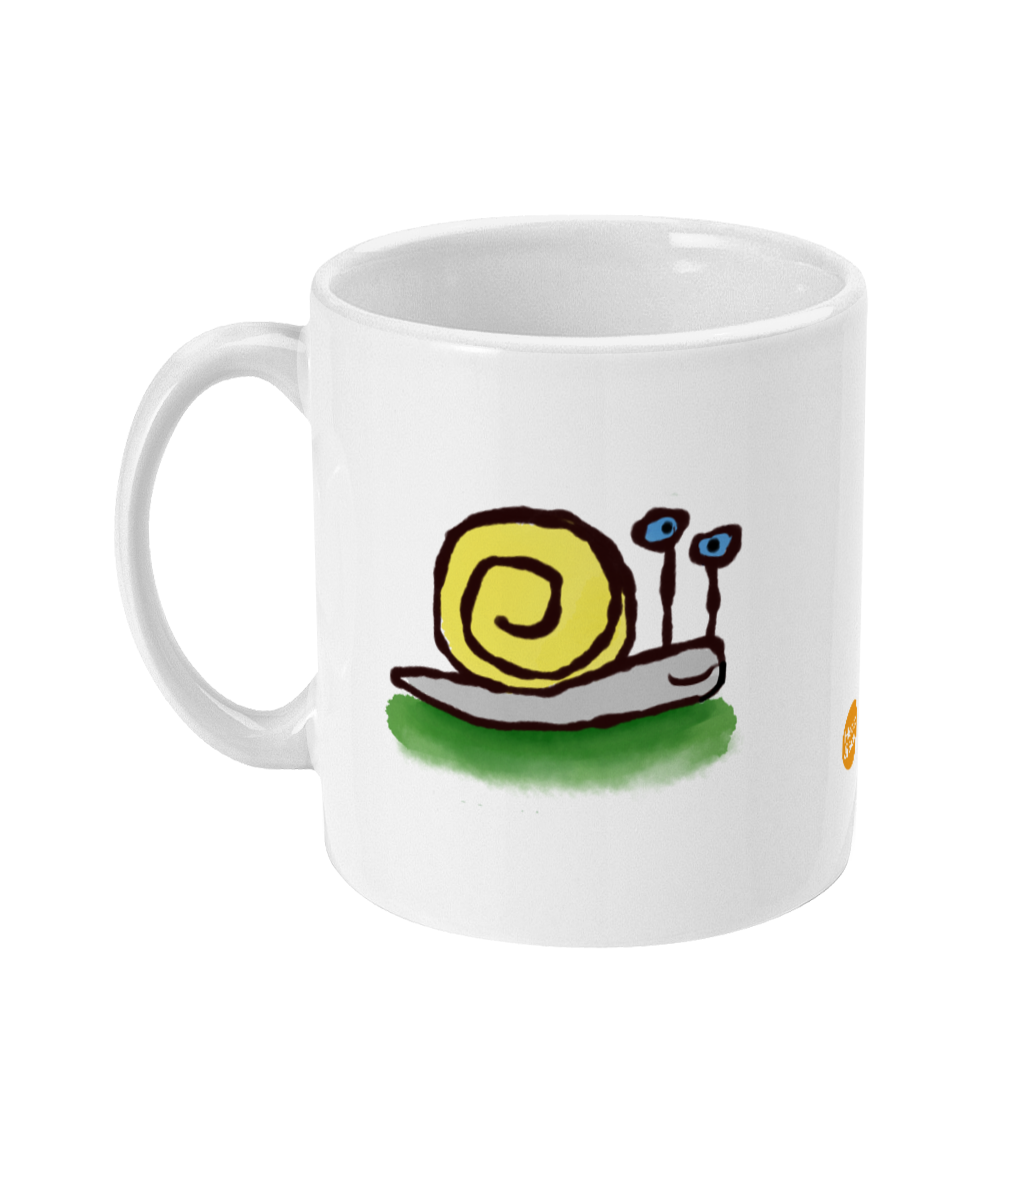 Sly the Snail Mug - Funny Snail illustrated coffee mug by Hector and Bone Left View